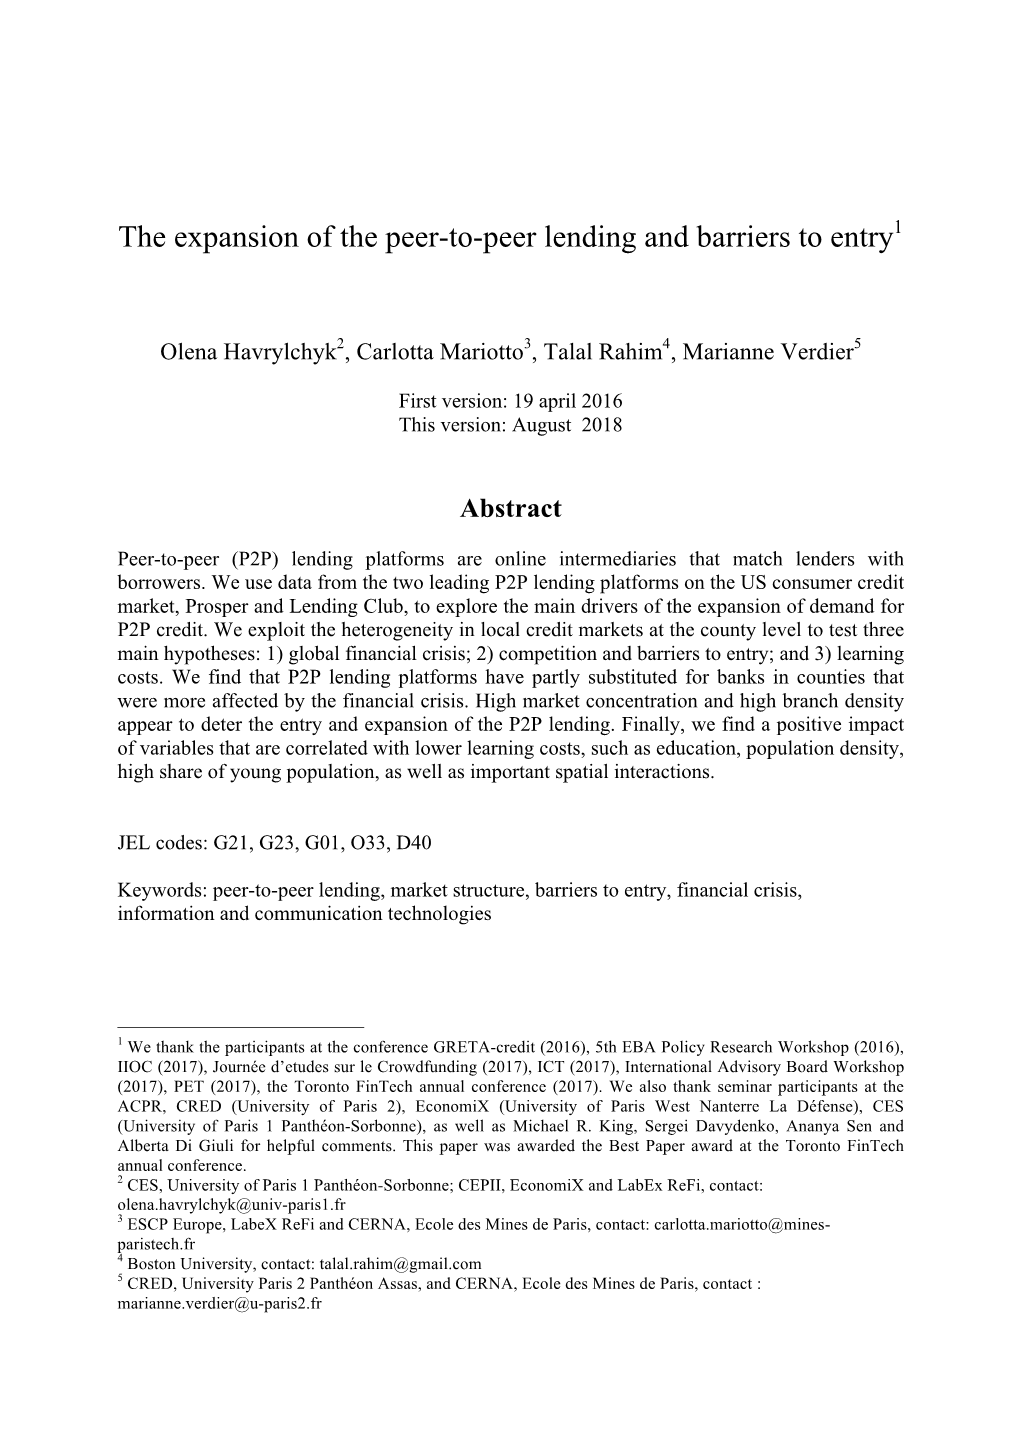 The Expansion of the Peer-To-Peer Lending and Barriers to Entry1